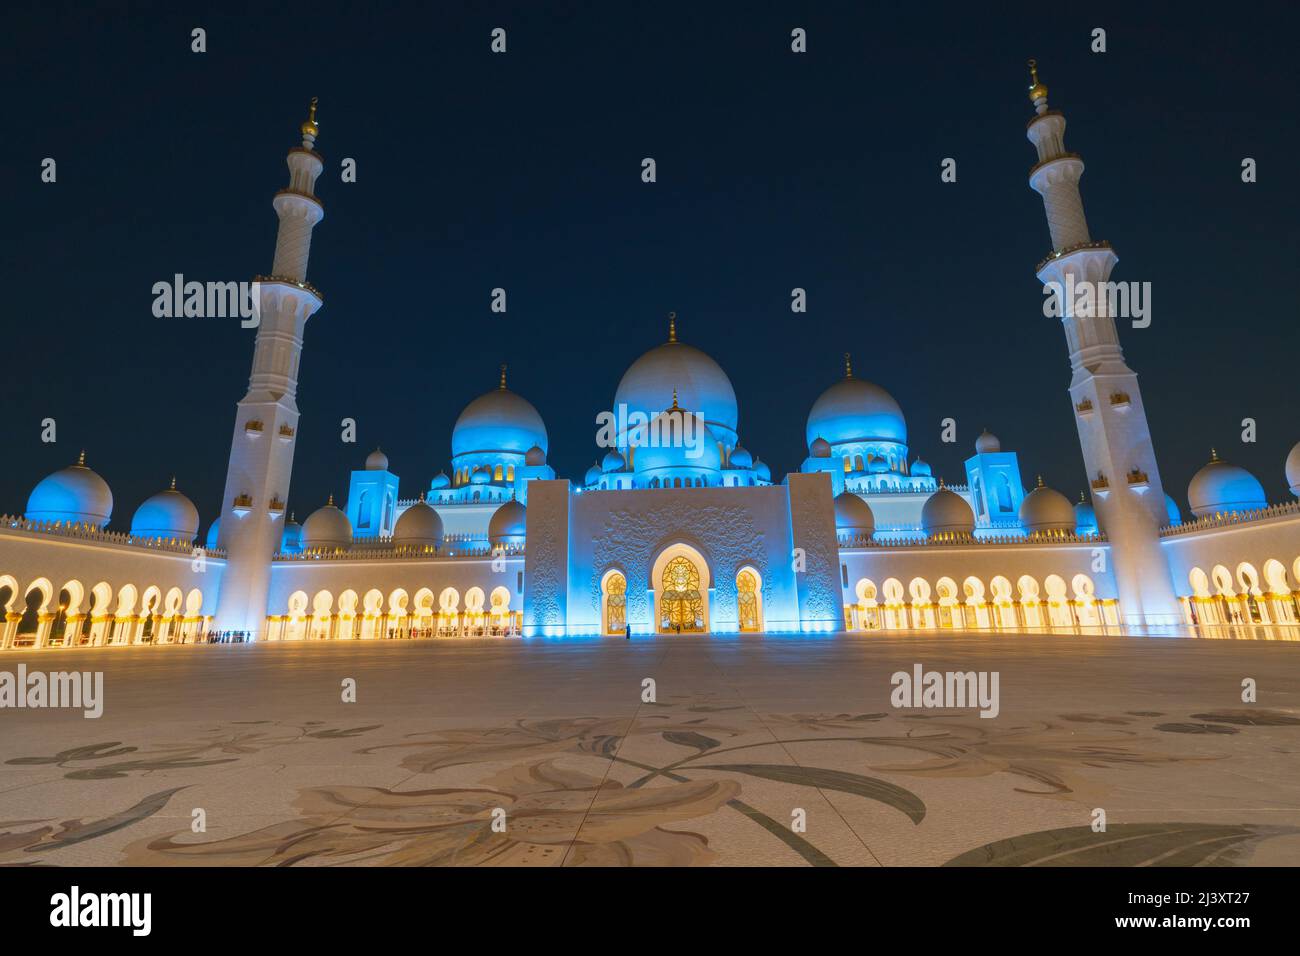 Panoramic view of Sheikh Zayed Grand Mosque, Abu Dhabi, United Arab Emirates. The third biggest mosque in the world.  Night view with blue and yellow Stock Photo